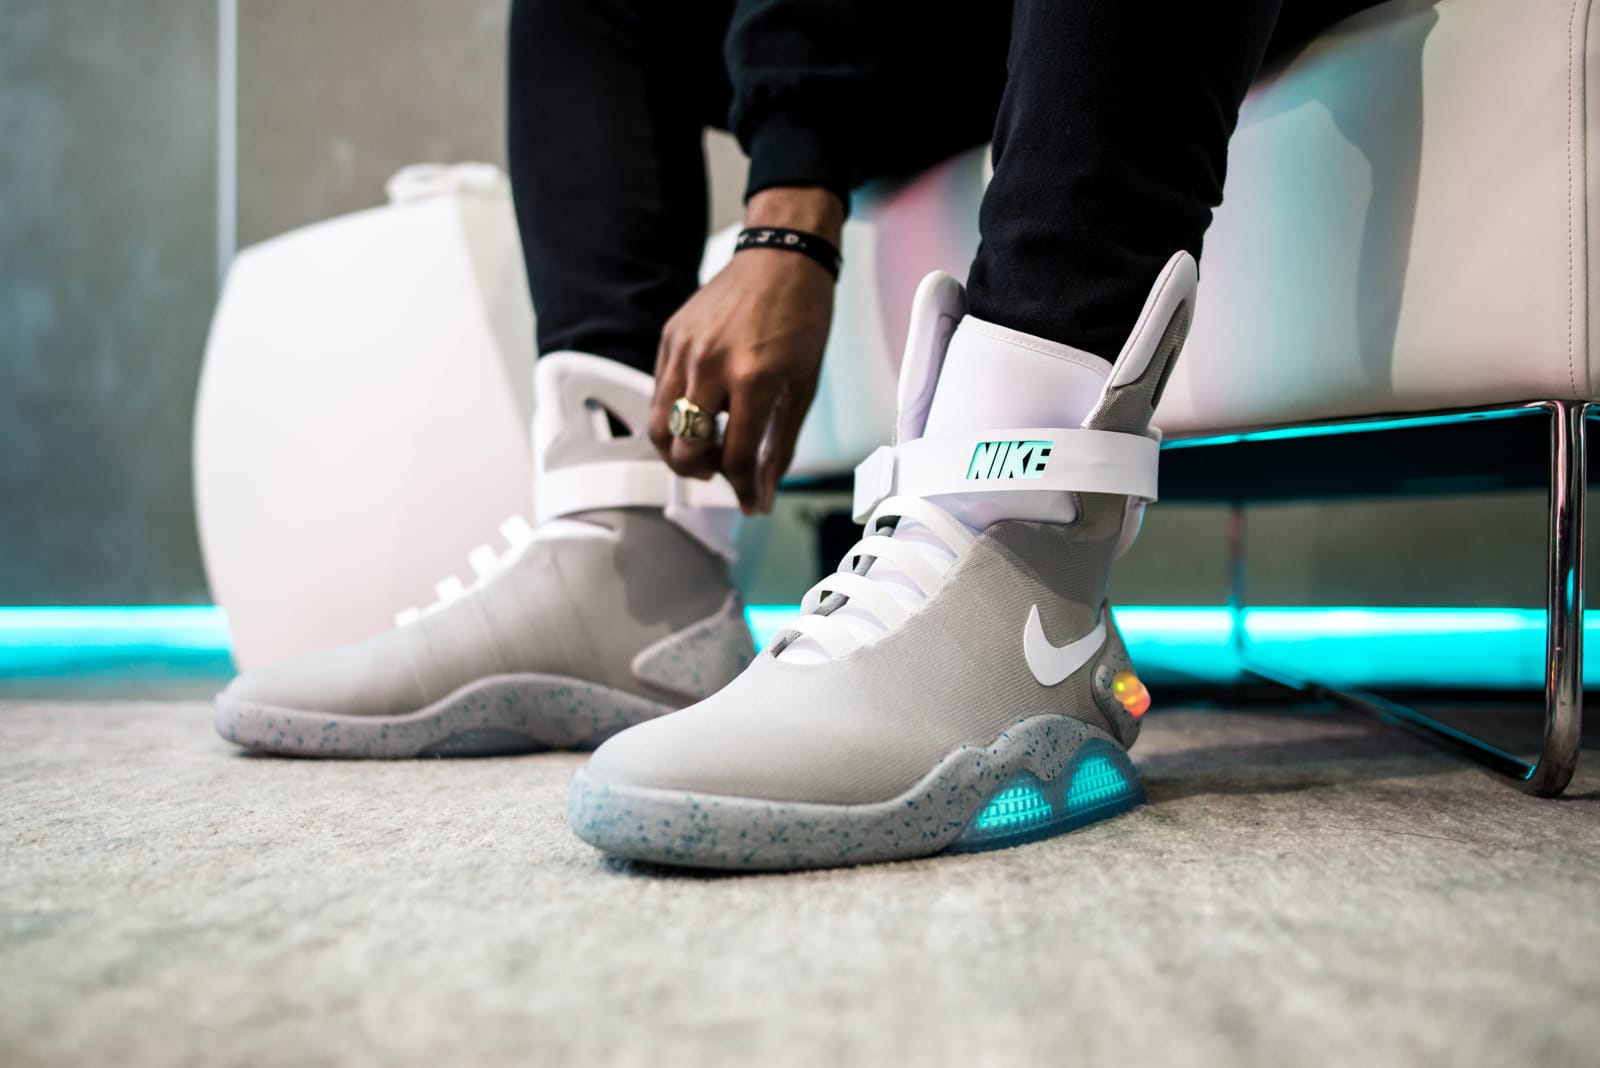 what was the retail price for the nike air mags